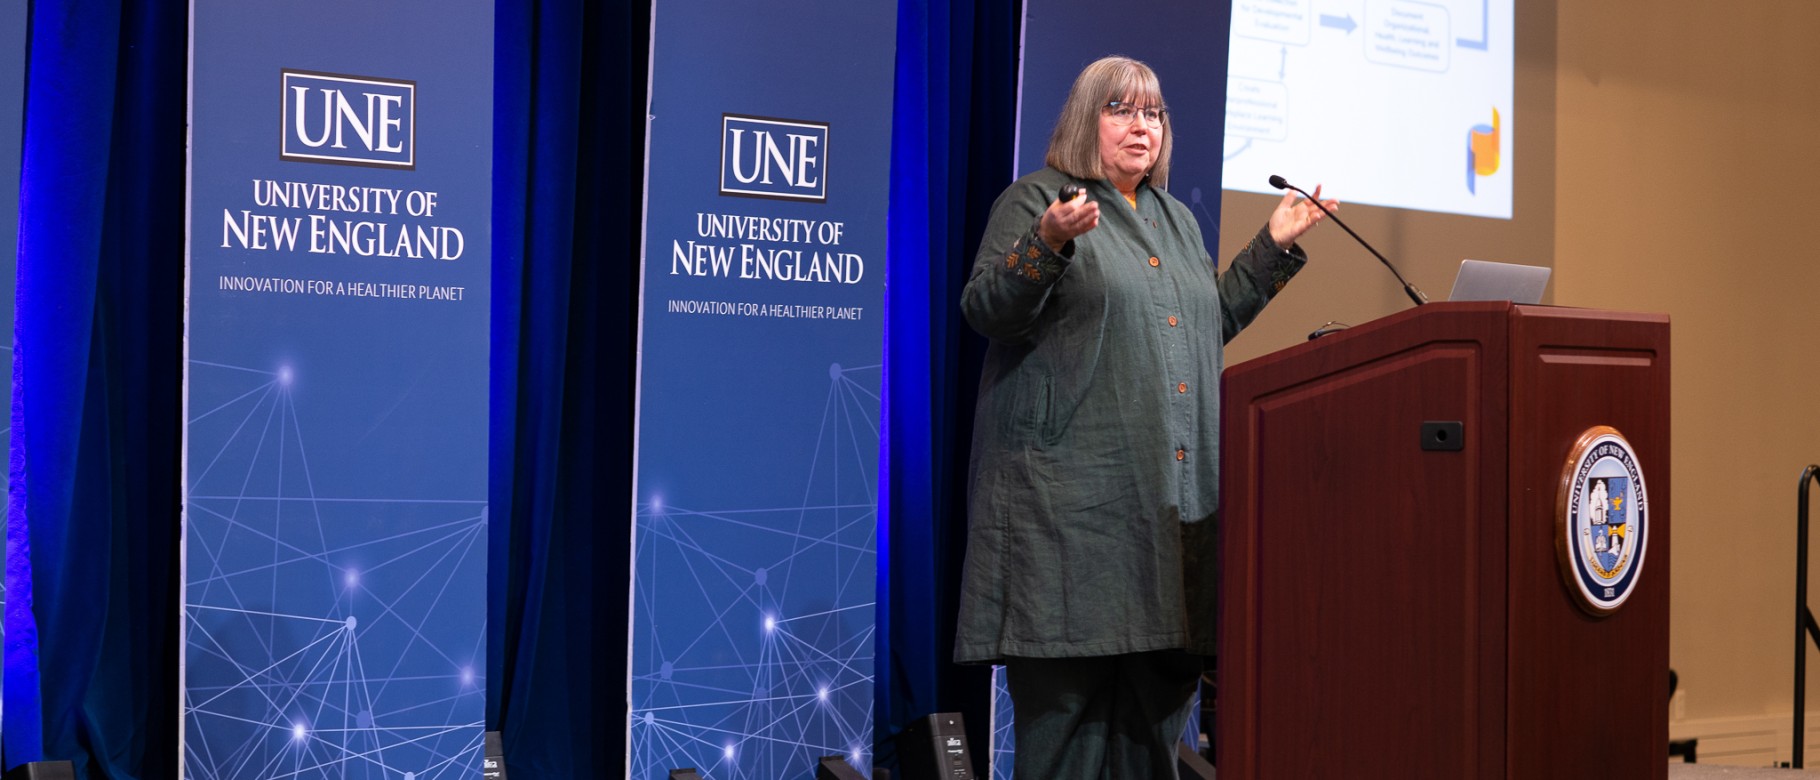 Dr. Christine Arenson at UNE